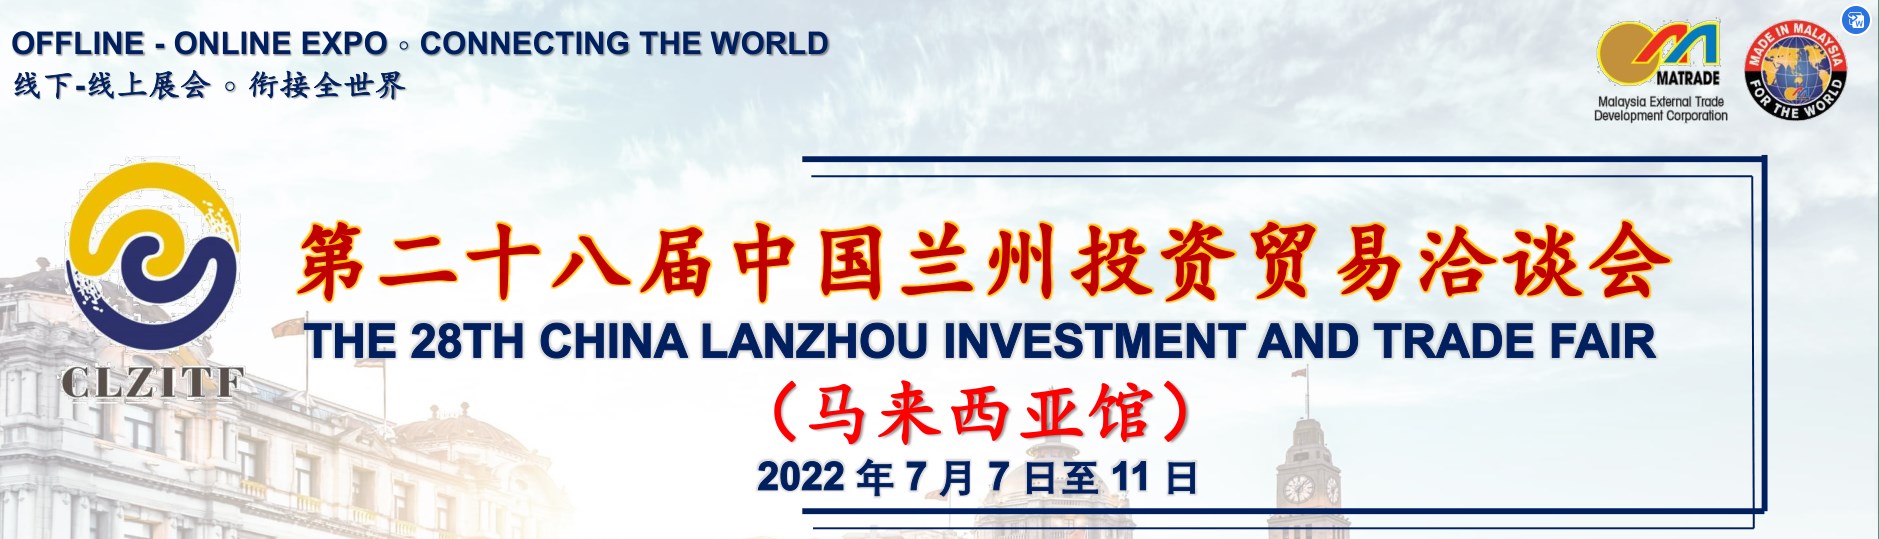 Déi 28. China Lanzhou Investment and Trade Fair